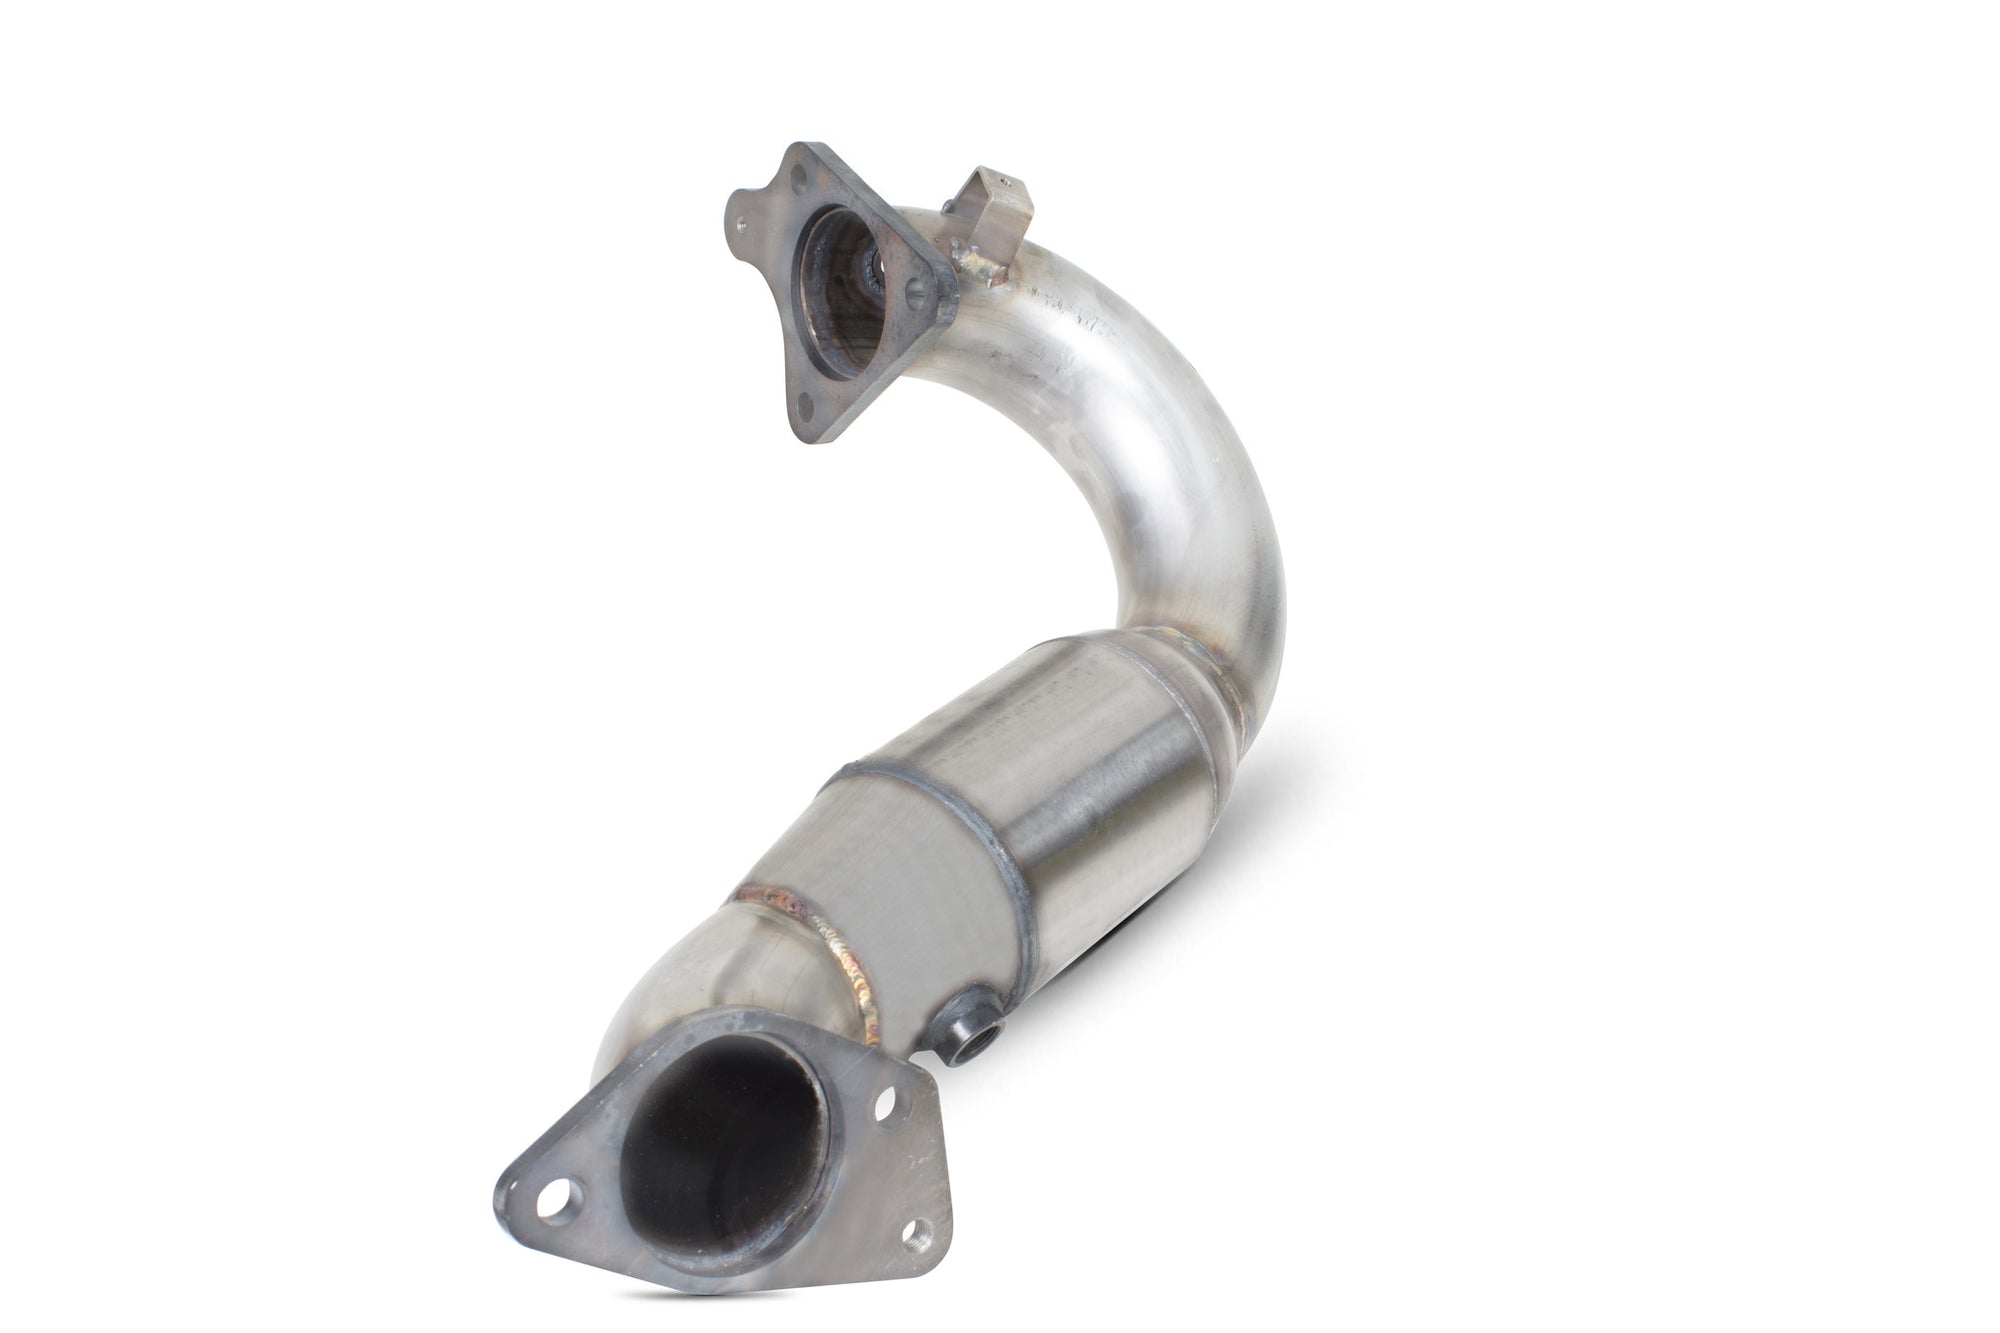 Renault Clio MK4 RS 200 EDC Primary high flow sports catalyst and secondary de-cat pipe